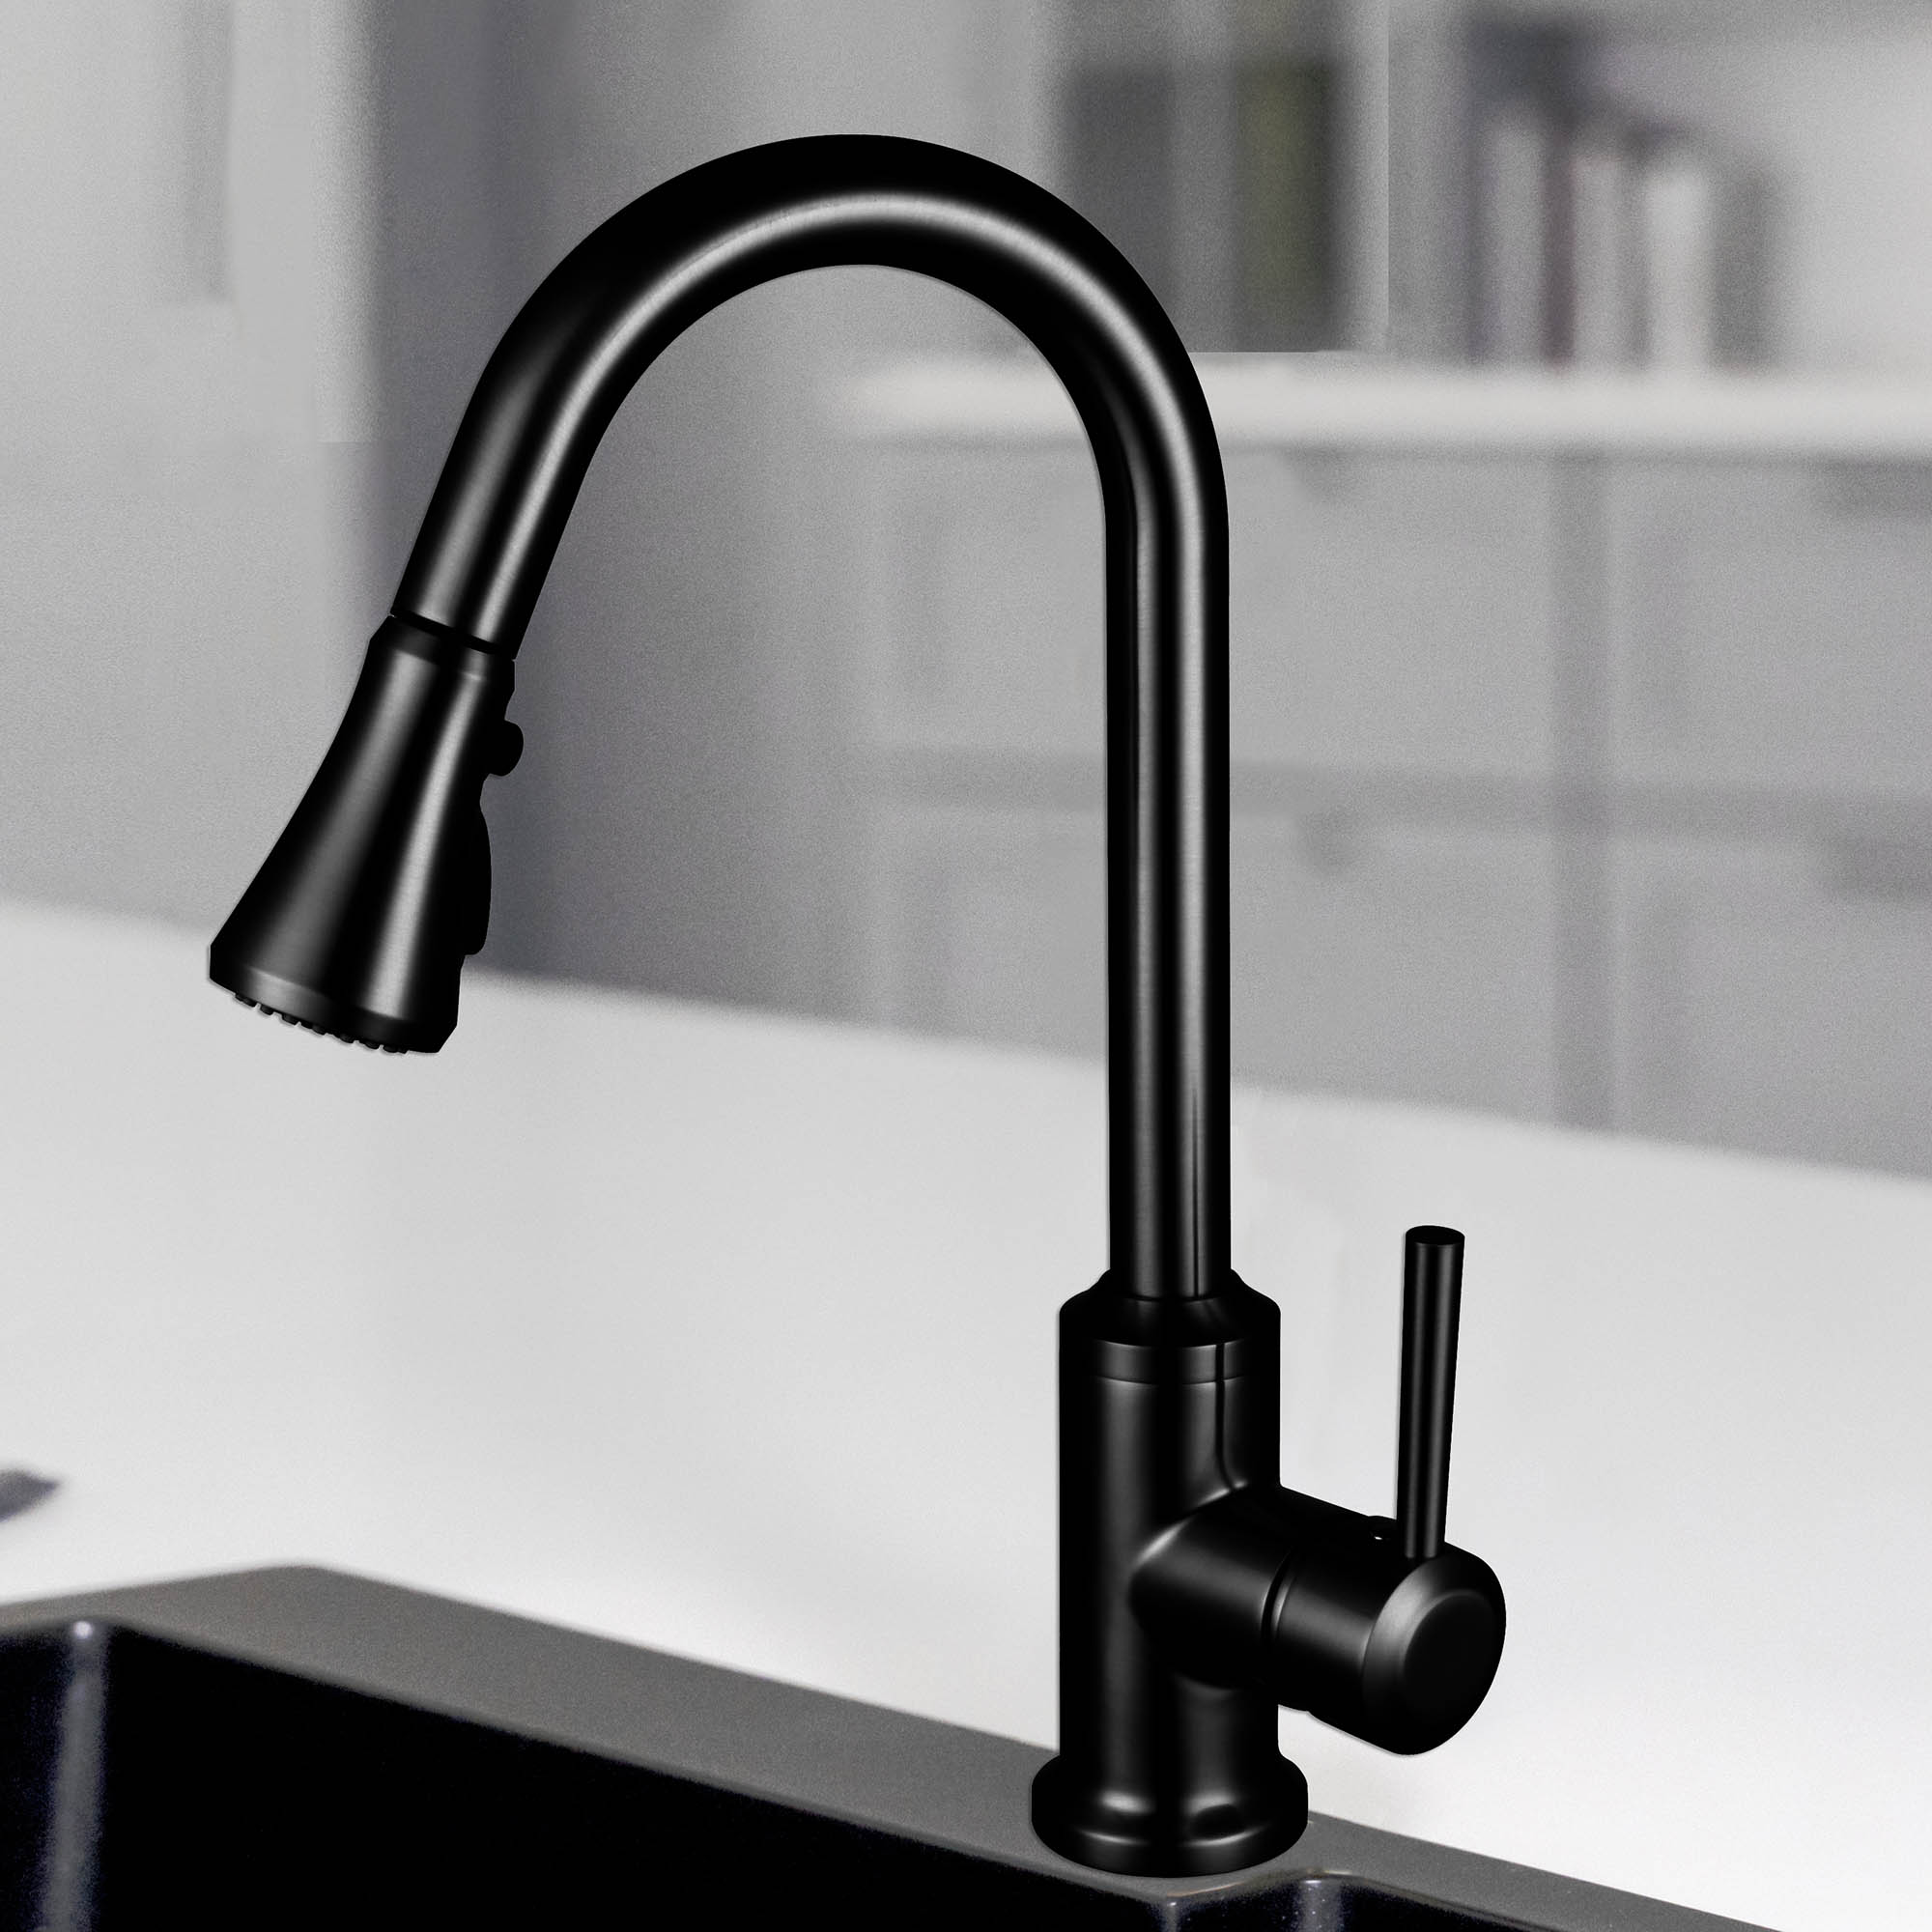 WOODBRIDGE WK101201BL Stainless Steel Single Handle Pull Down Kitchen Faucet in Matte Black Finish.